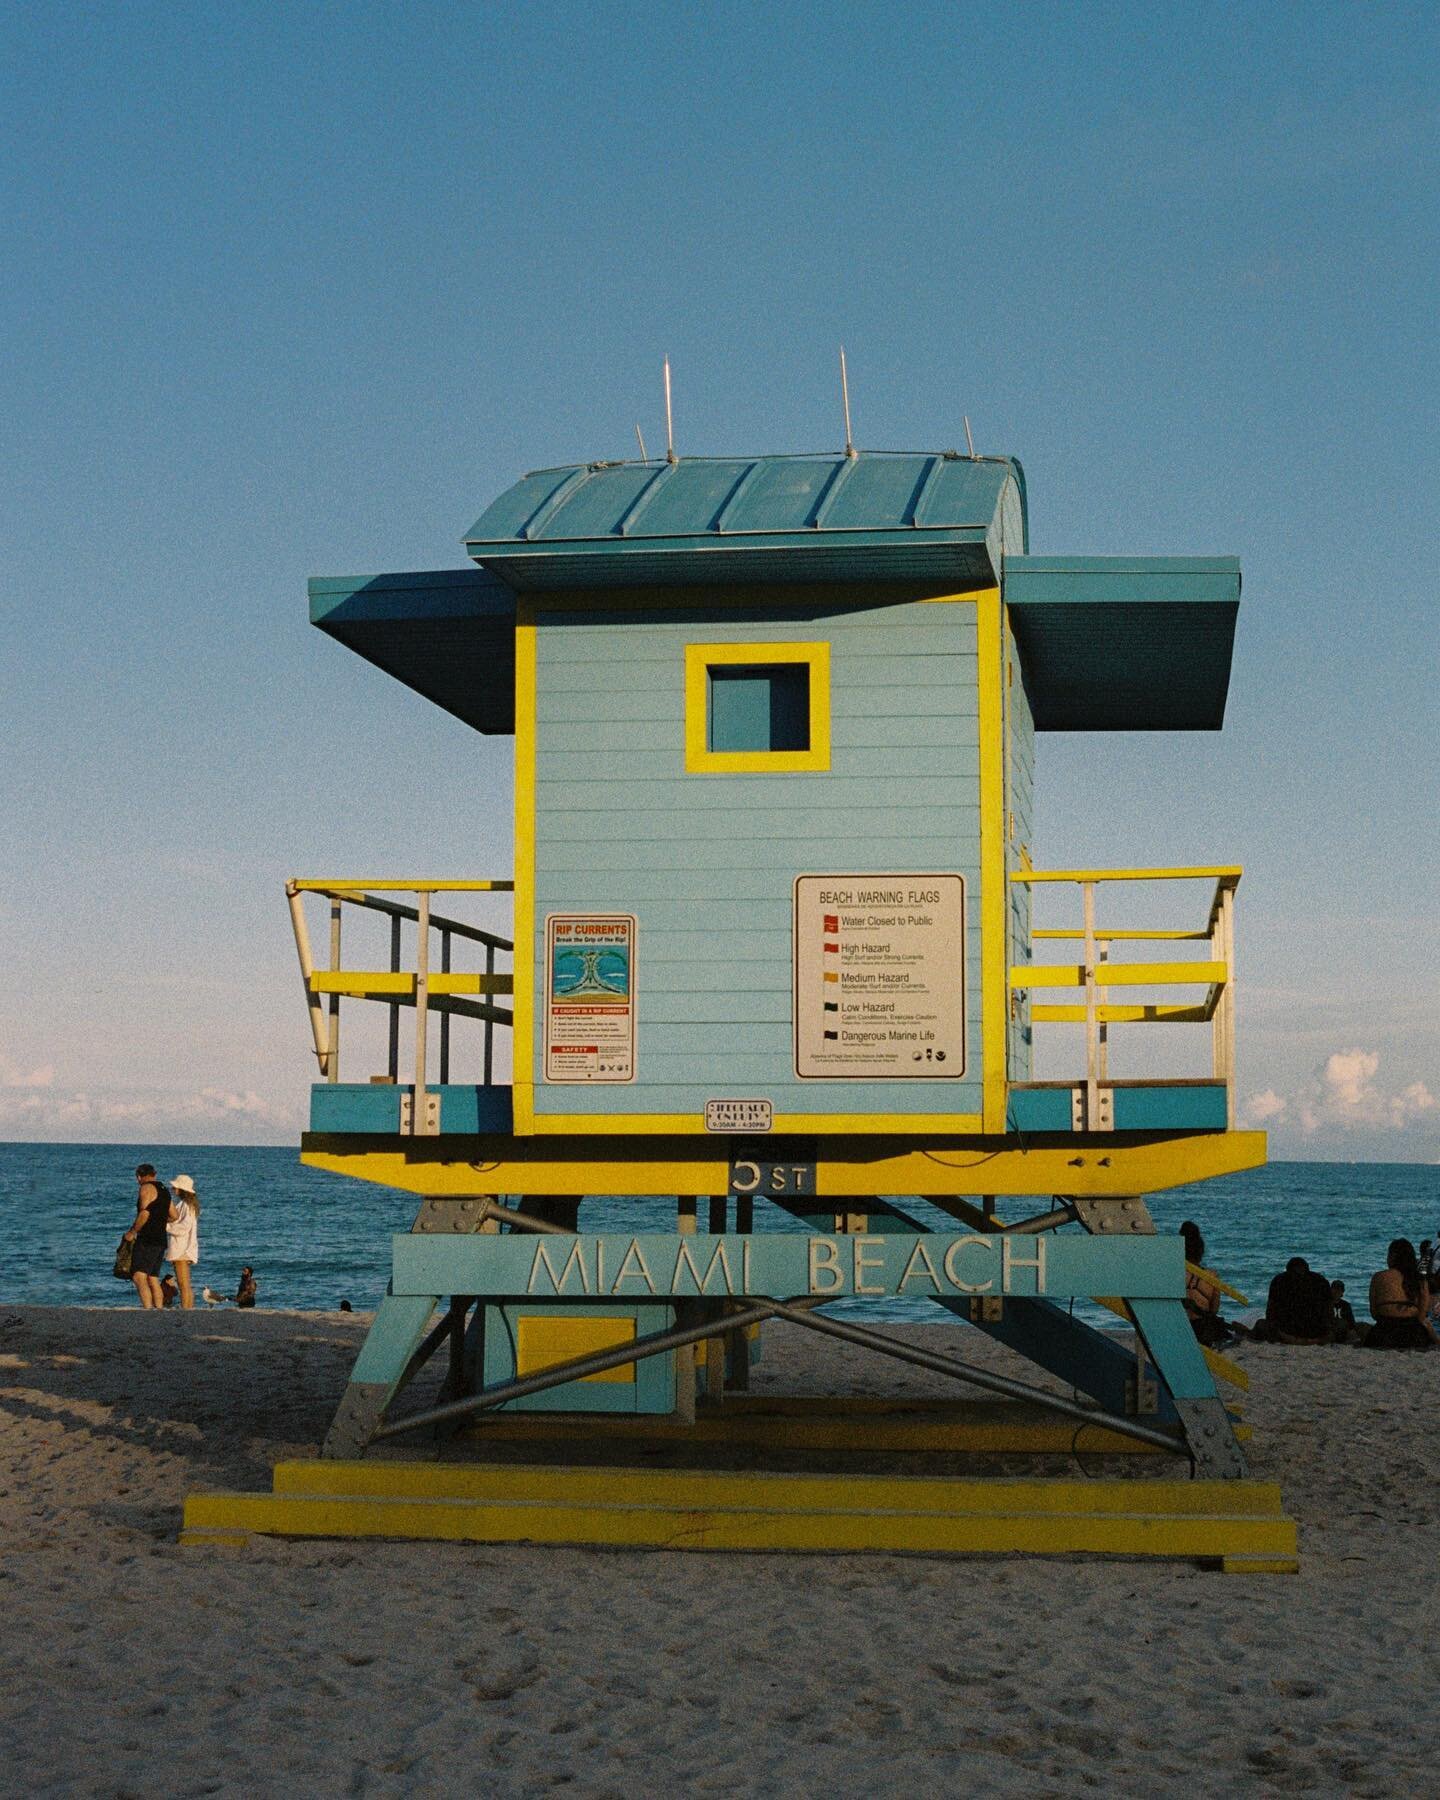 Lifeguard towers at sunset 🌅 👉🏻 I think the third one is banging ✨Miami Beach, FL

Developed &amp; scanned by @carmencitafilmlab 🎞